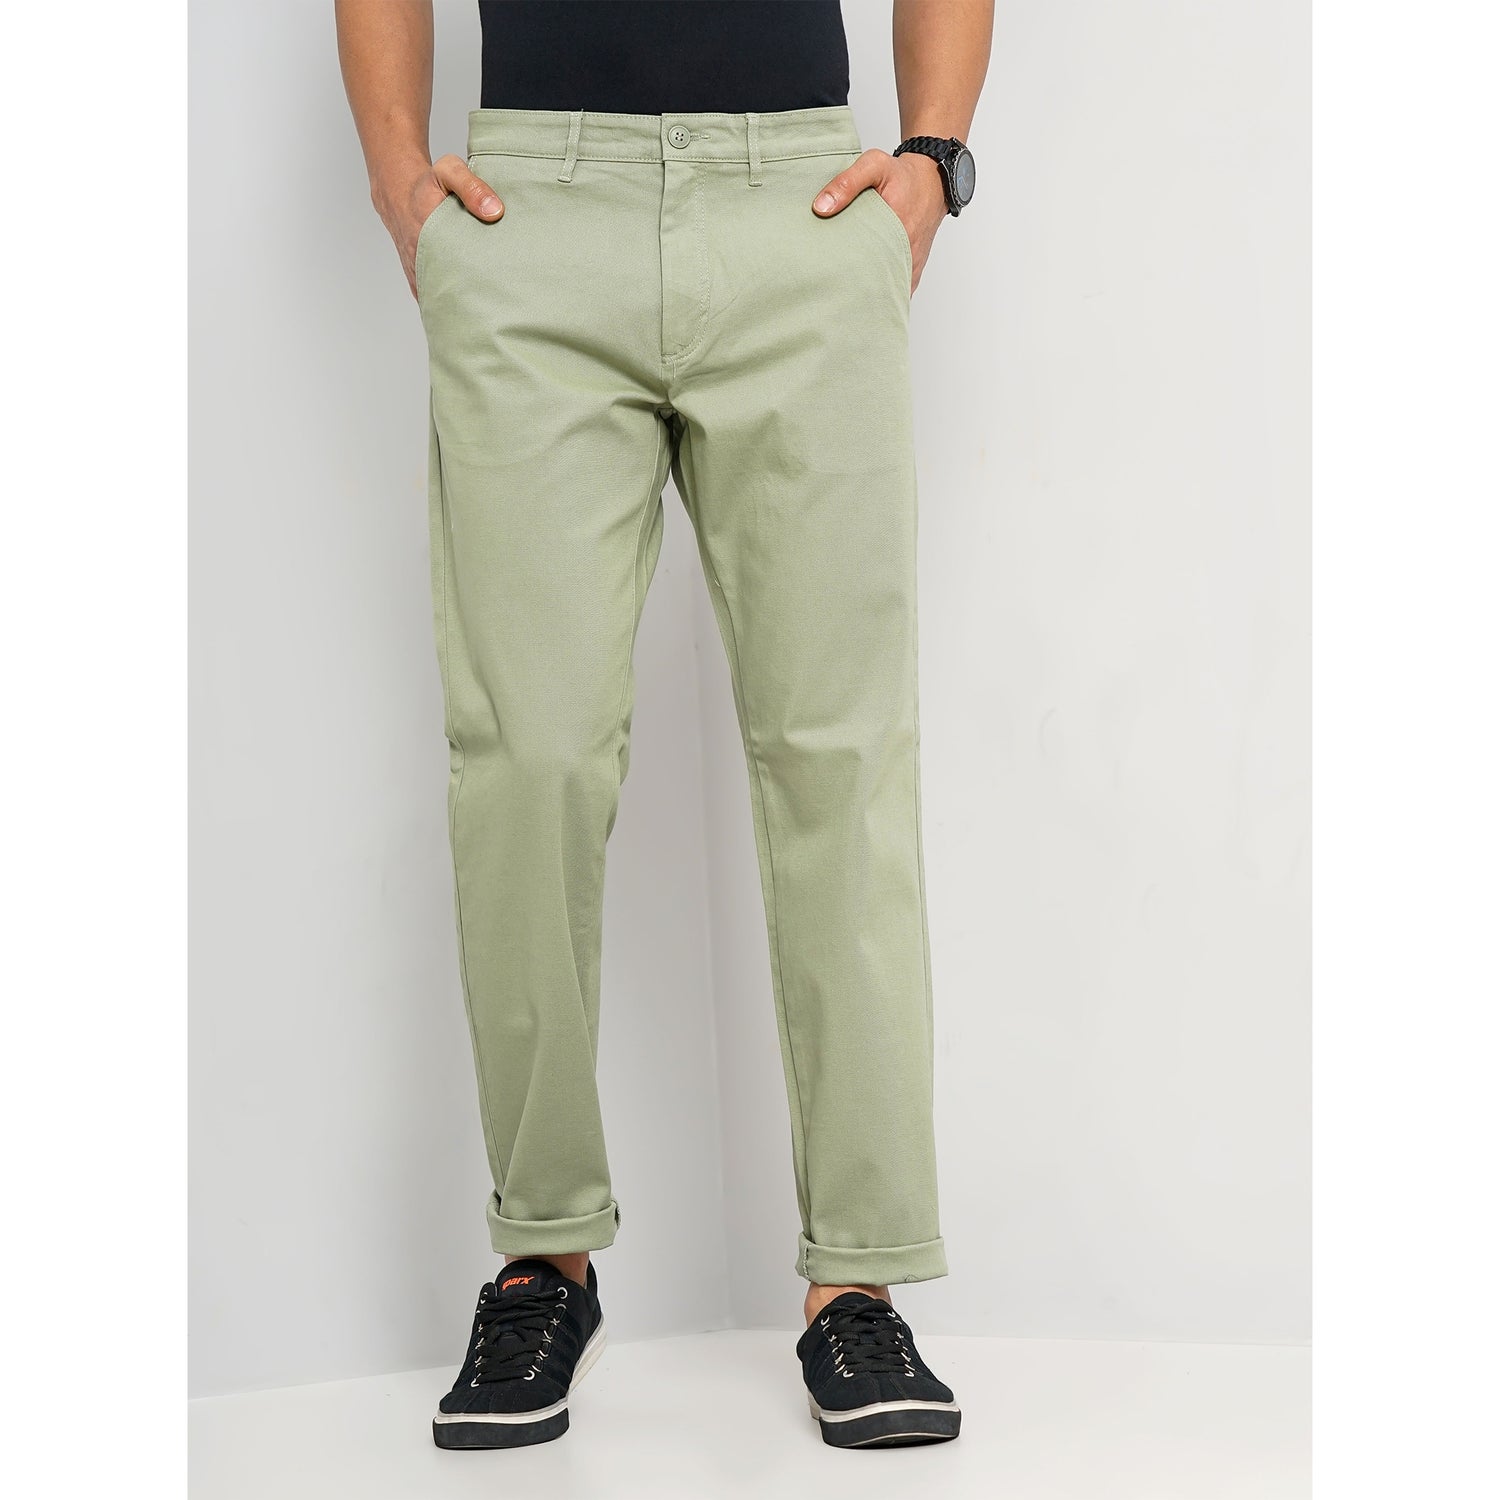 Men's Green Solid Slim Fit Cotton Trousers (TOCHARLES1)